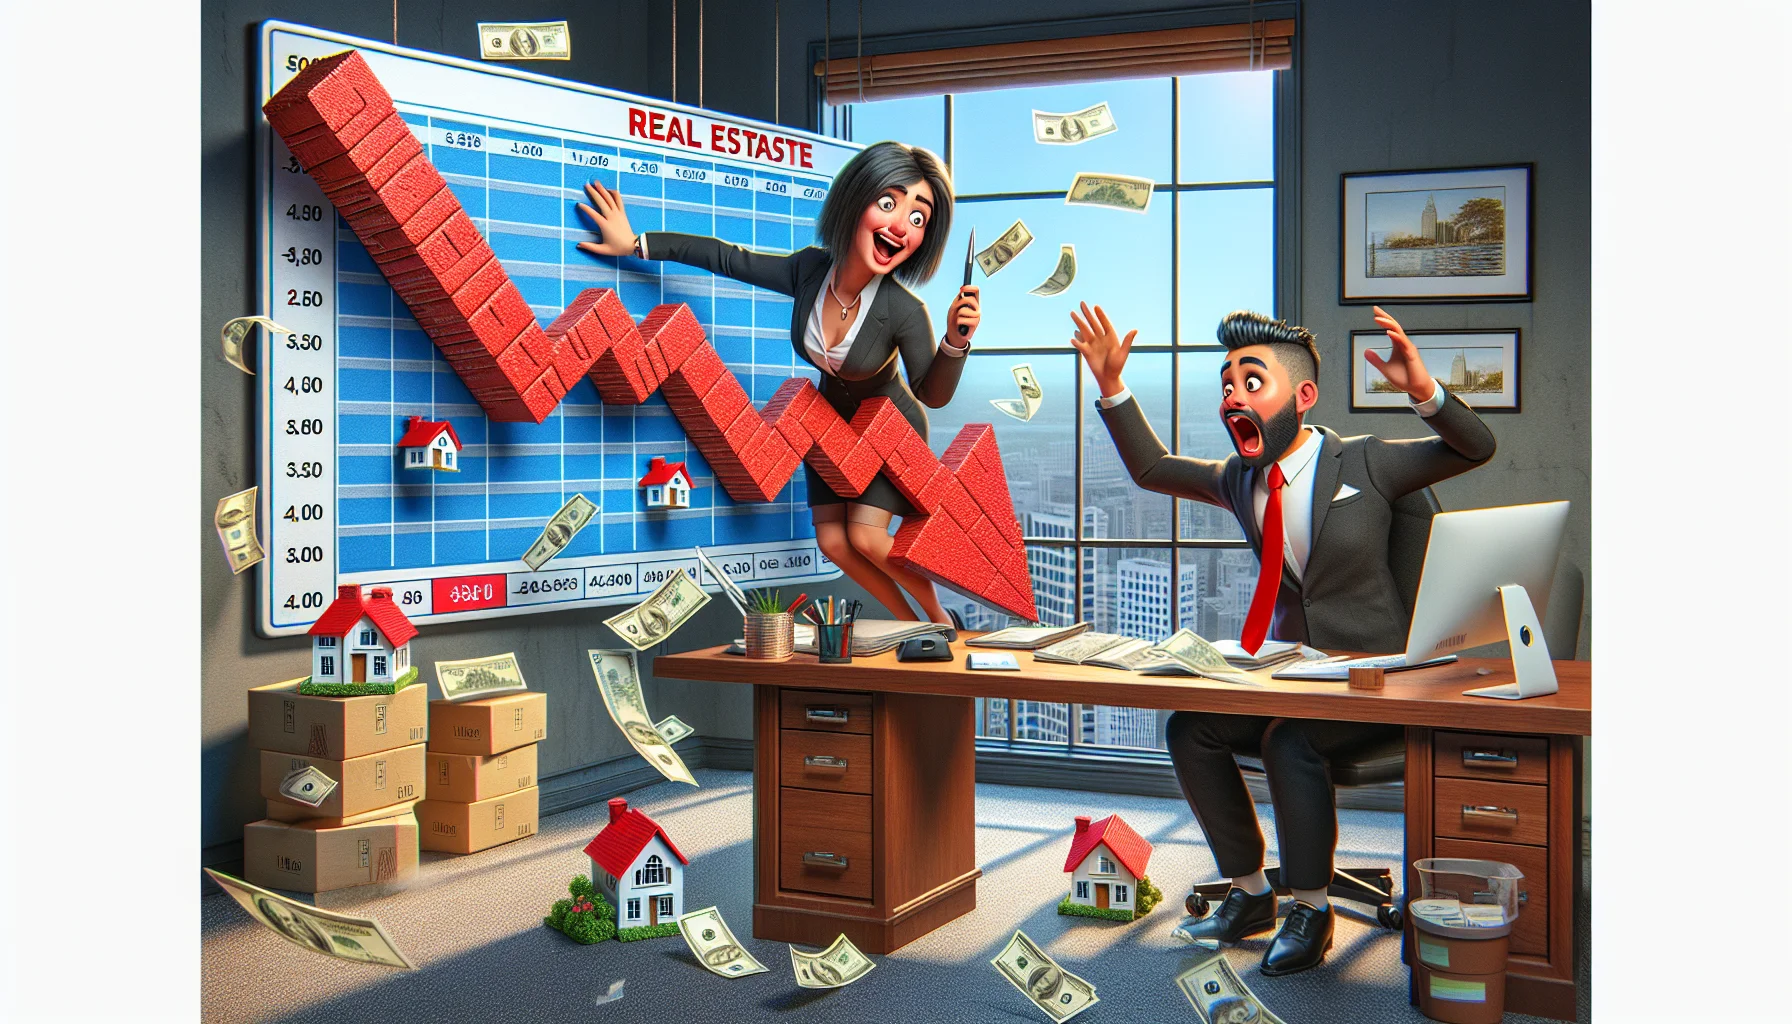 Envision a humorous, highly realistic image which portrays the ideal scenario for real estate, with housing prices dramatically plummeting. The scene is taking place at a real estate agency with two excited characters: a Hispanic female agent, exuberantly updating the prices on a large board, and a South Asian male customer's surprised reaction. Also visible is a giant red arrow made of brick plunging into the floor, symbolizing the falling prices, with miniature houses sliding down it. Currency notes are floating in the air, and the office setting is evident from desks, computers, and property charts.